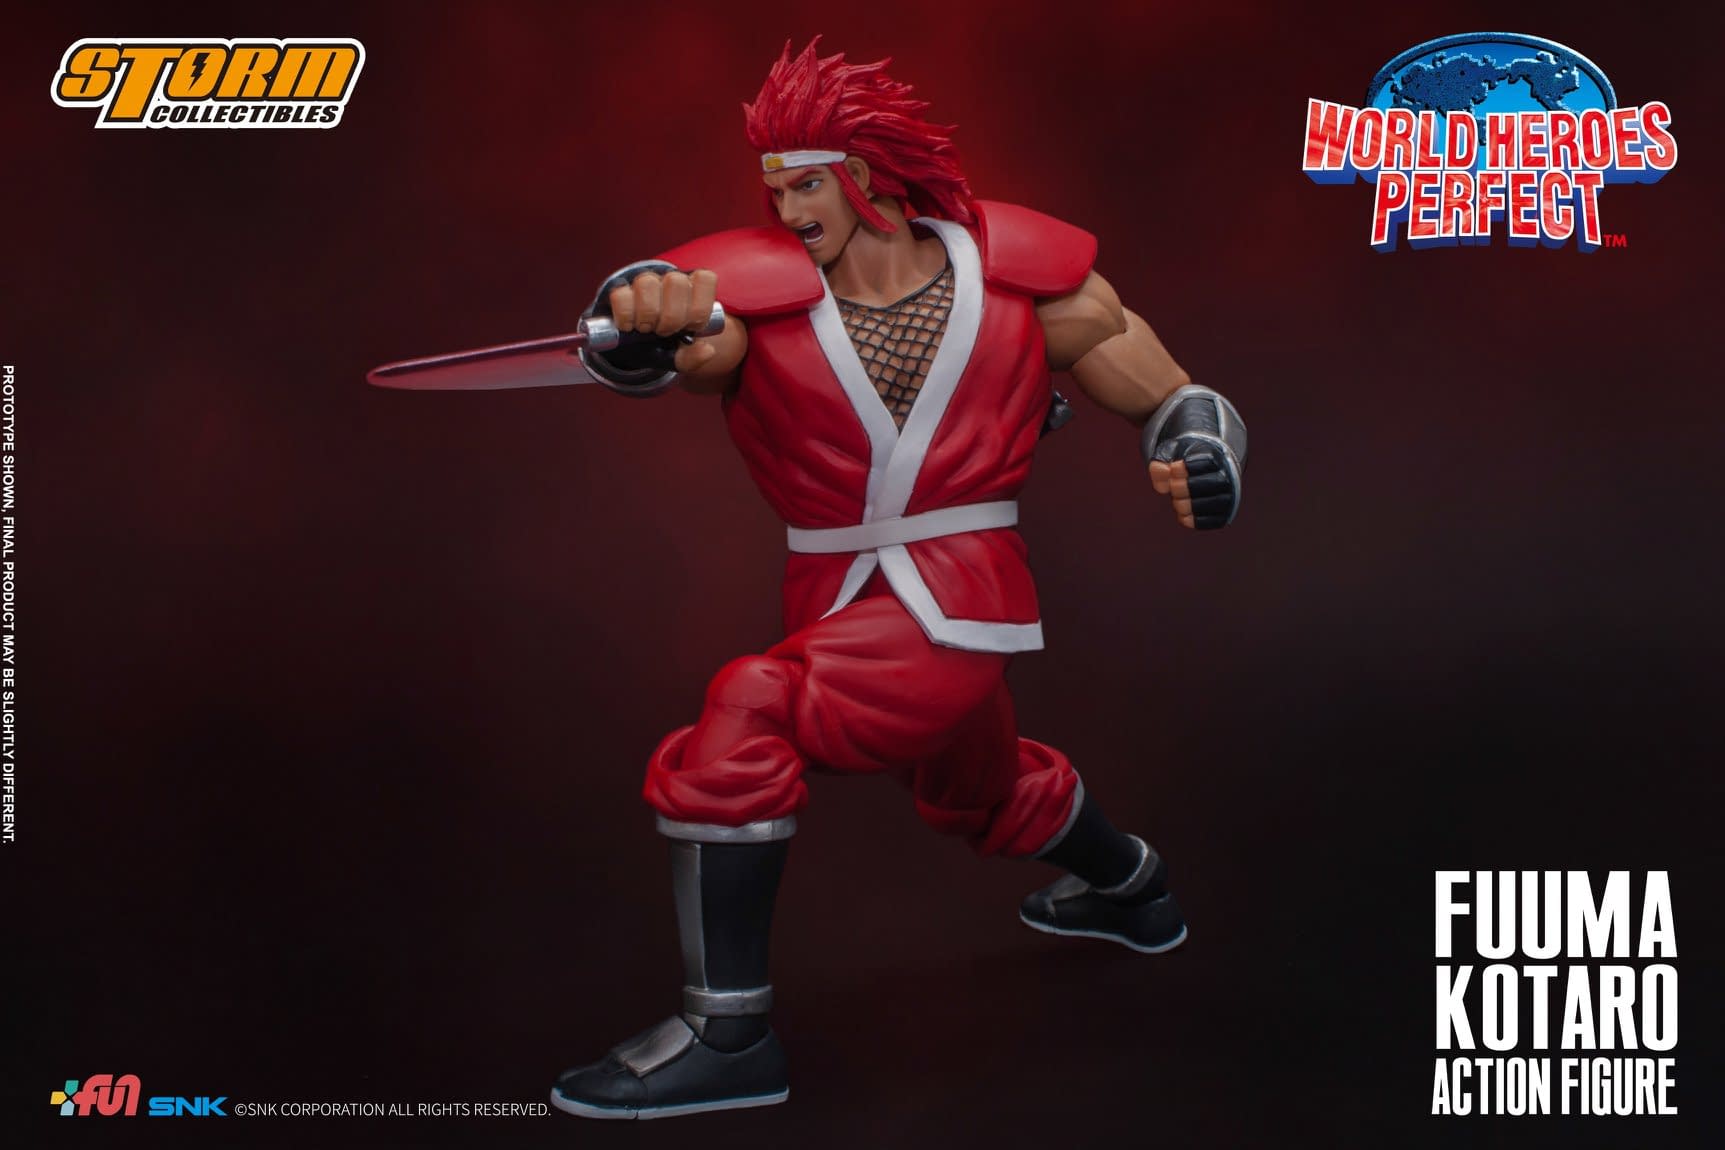 World Heroes Perfect Fumma Kotaro Figure from Storm Collectibles